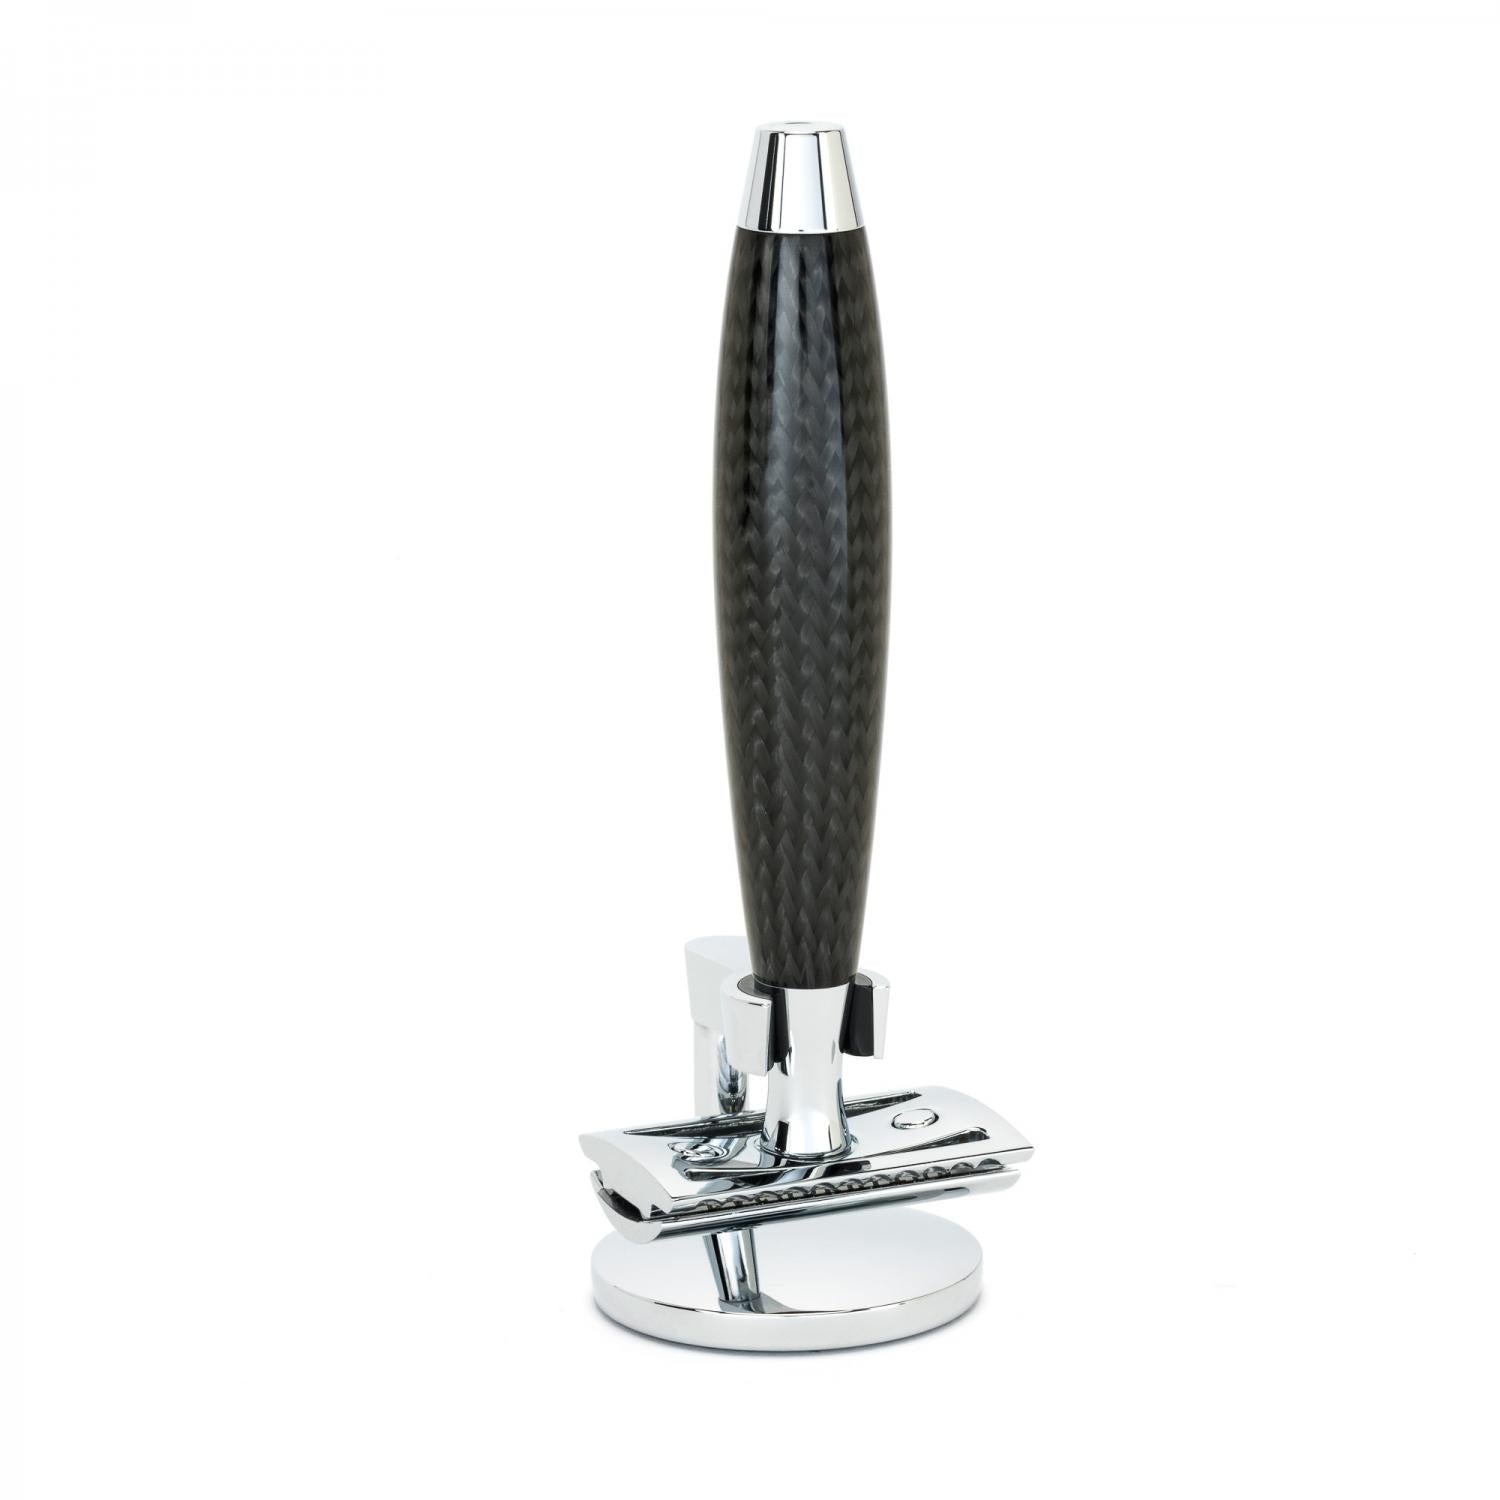 MÜHLE Edition Carbon 3-Piece Silvertip Badger & Safety Razor Shaving Set, Stand and Razor